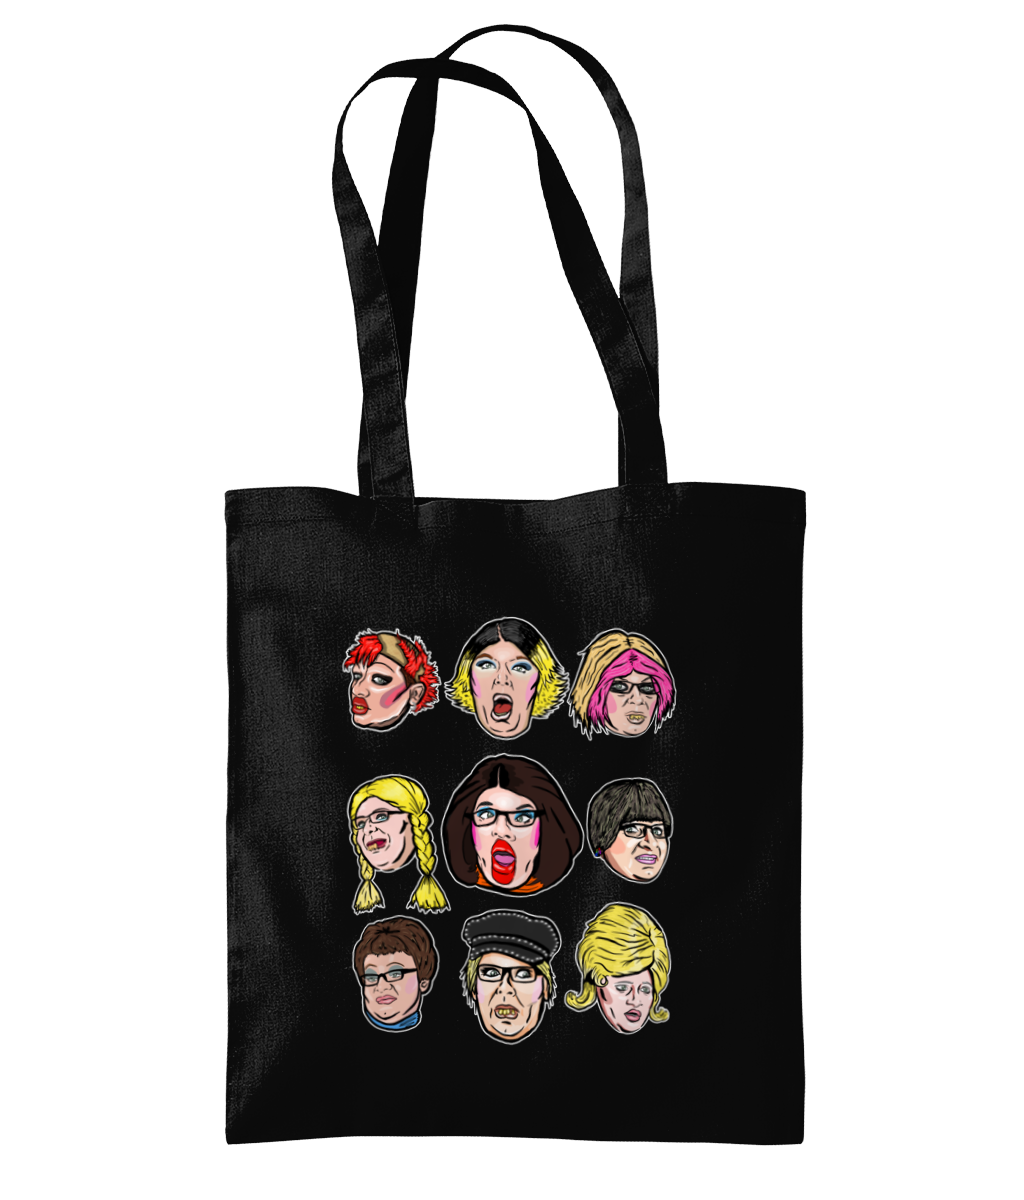 Bailey J Mills Faces Tote Bag